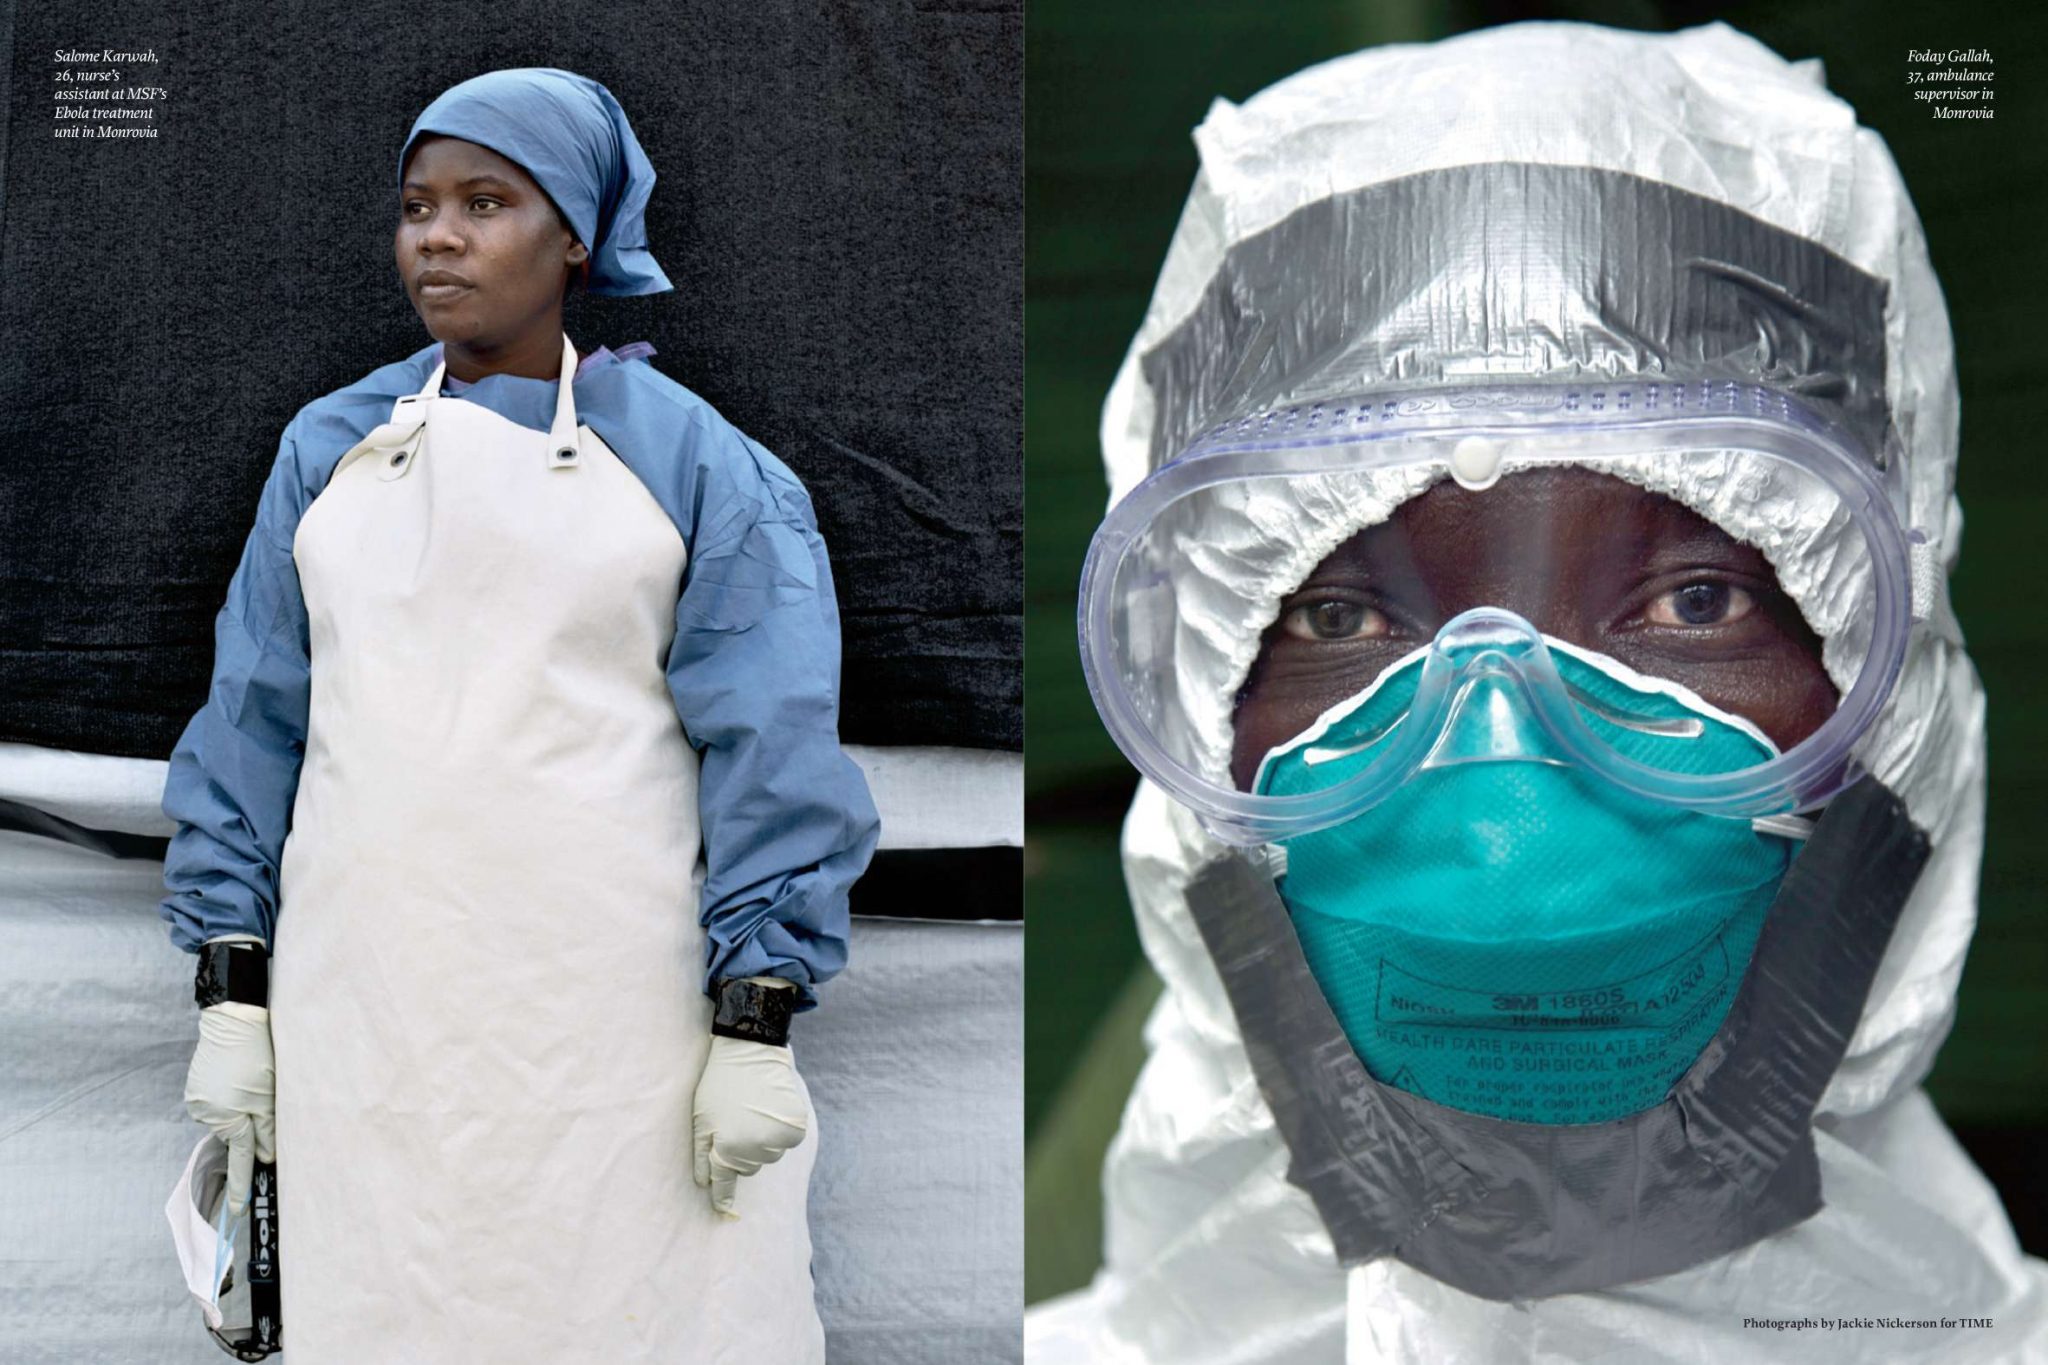  | Time Magazine: The Ebola Fighters | 5